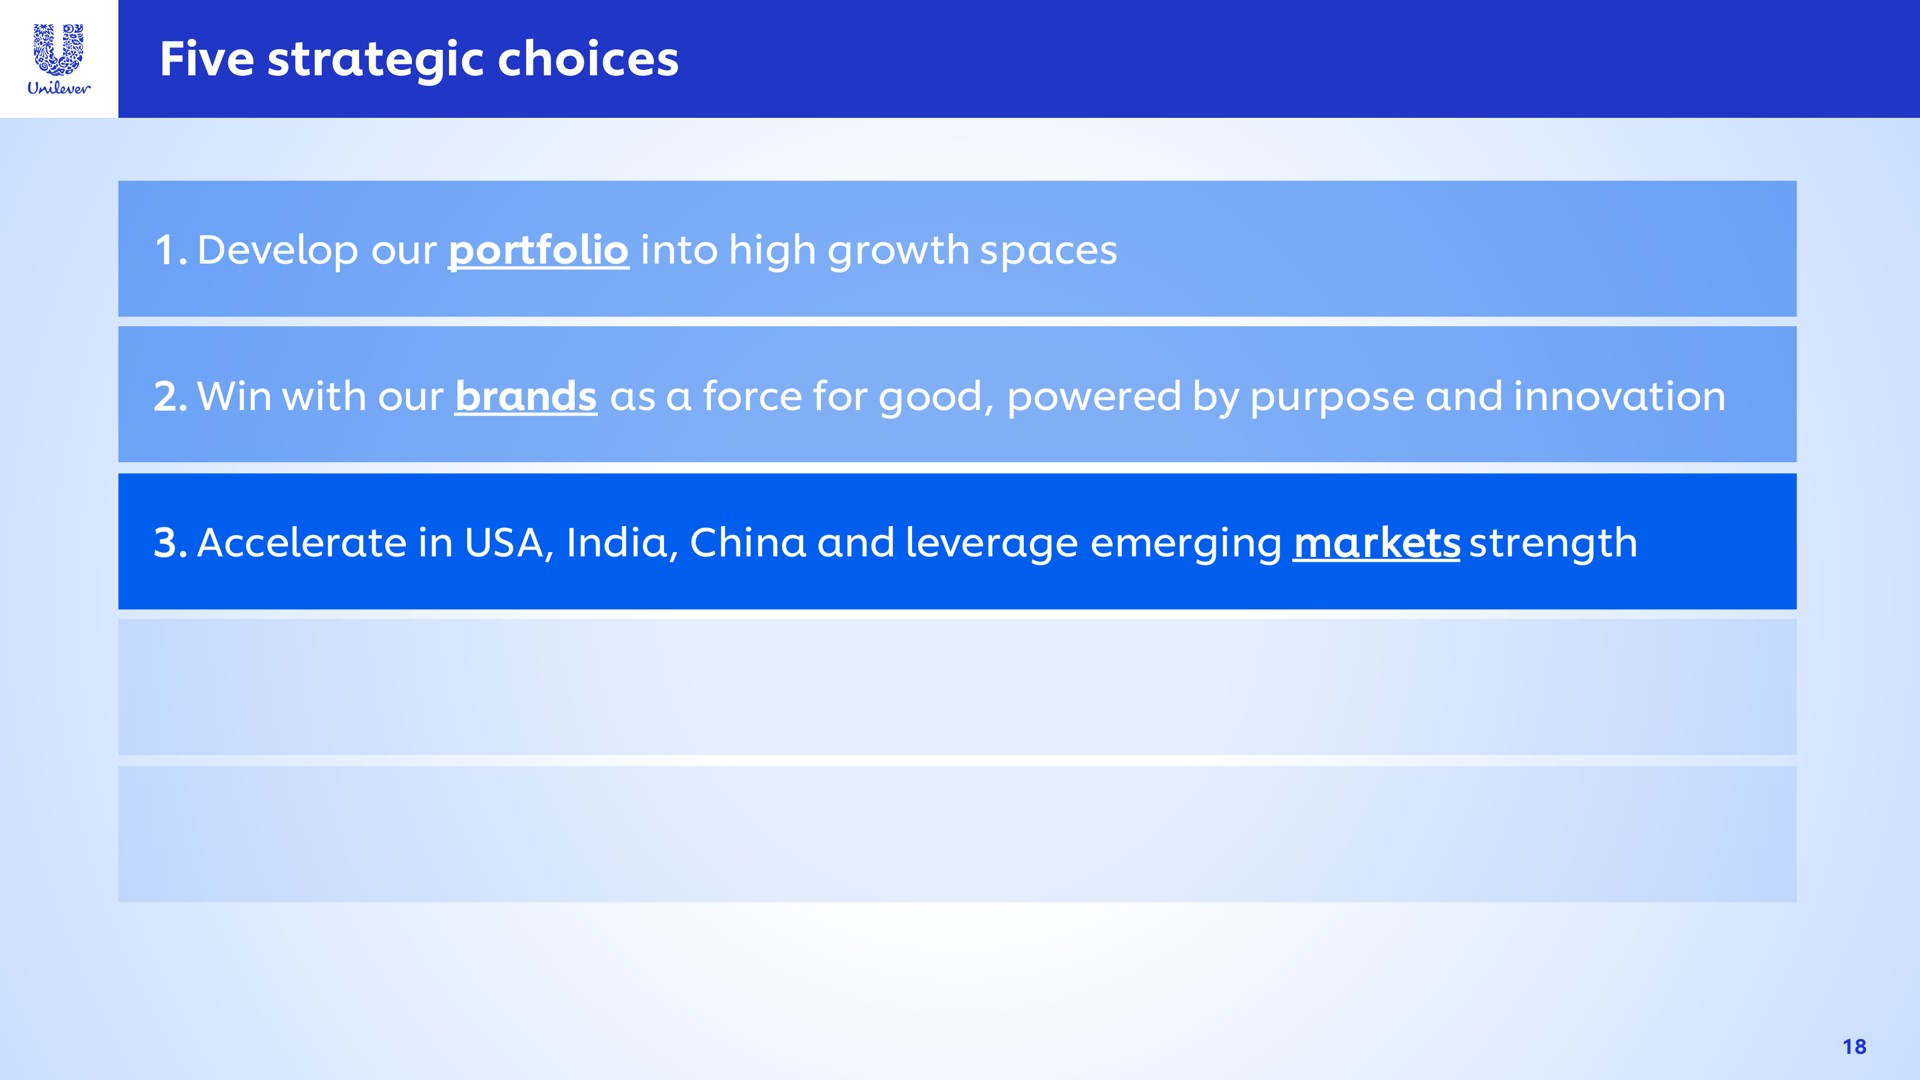 five strategic choices accelerate in china and leverage emerging markets strength | Unilever